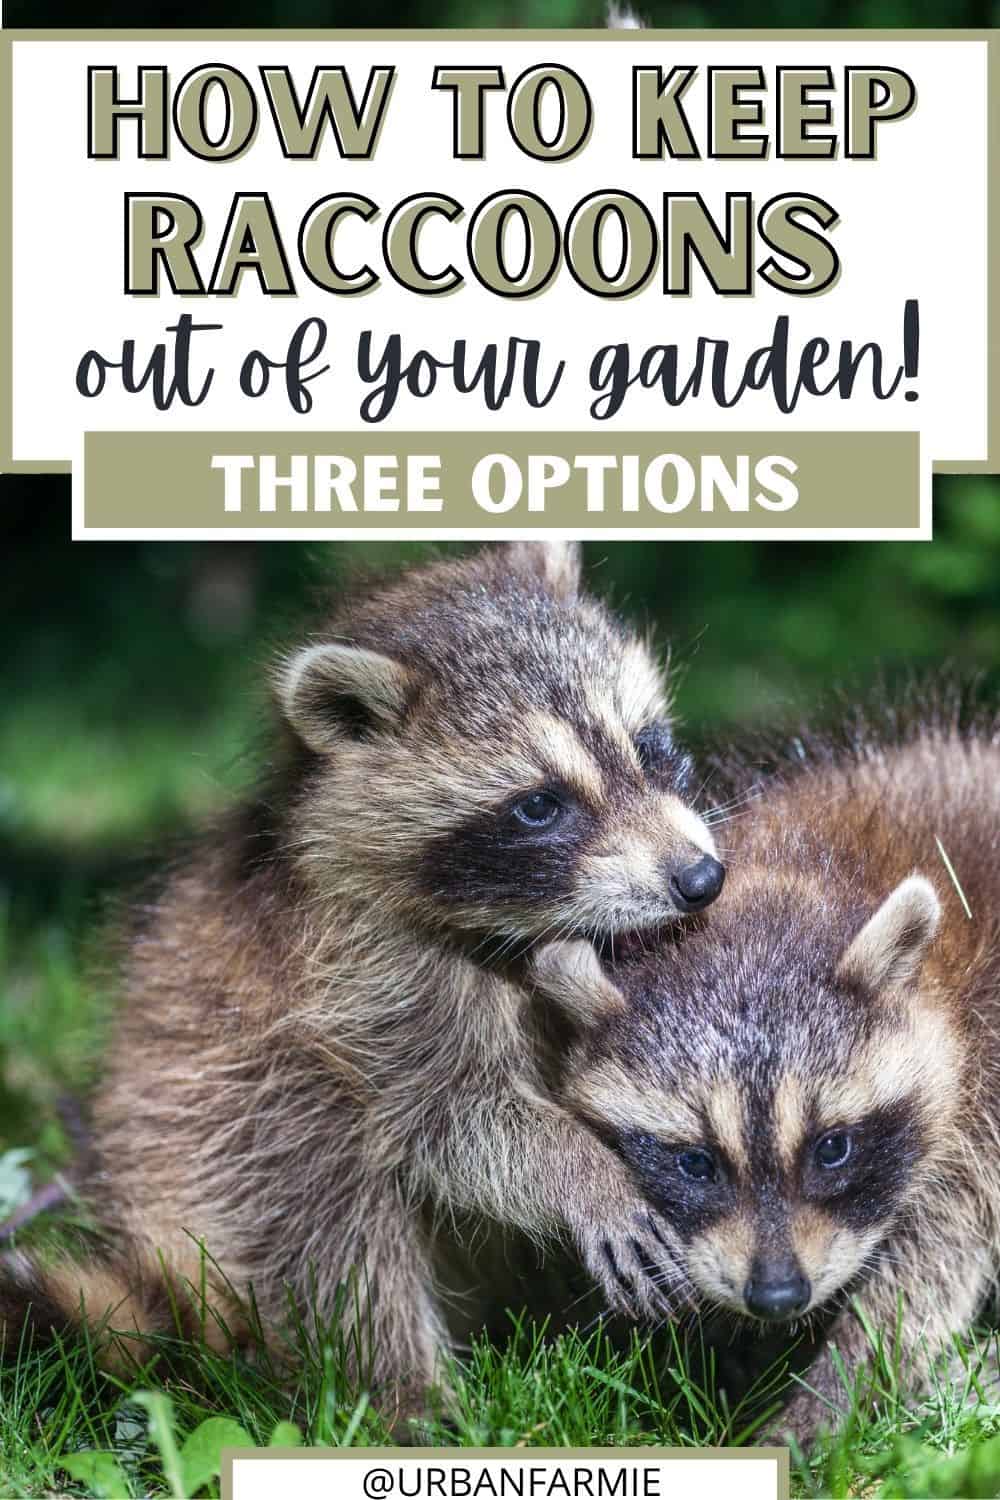 Two raccoons with text overlay "How to keep raccoons out of your garden"